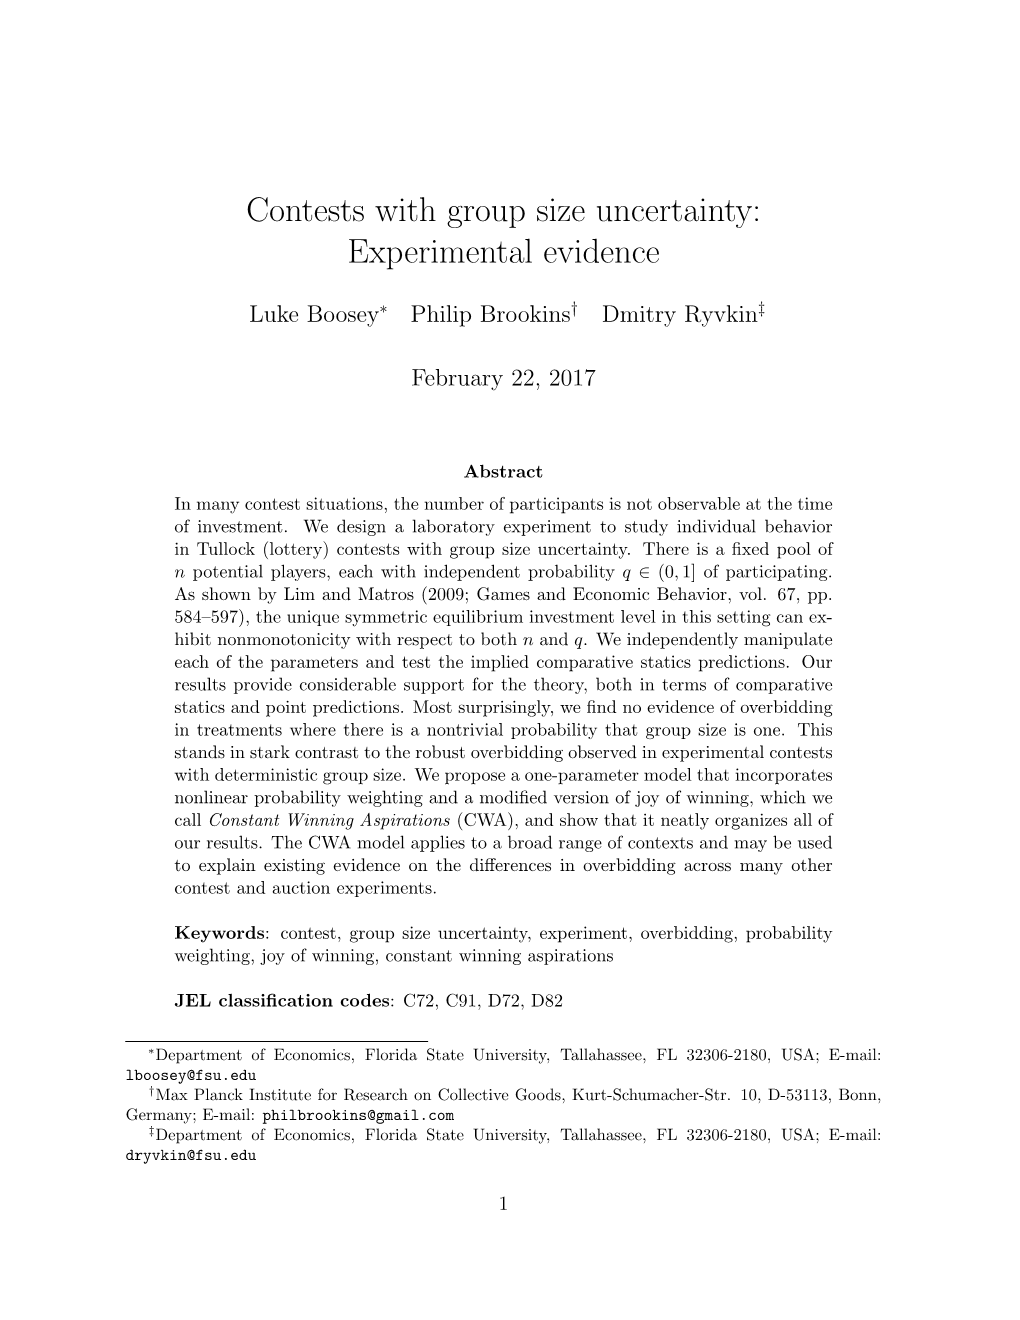 Contests with Group Size Uncertainty: Experimental Evidence